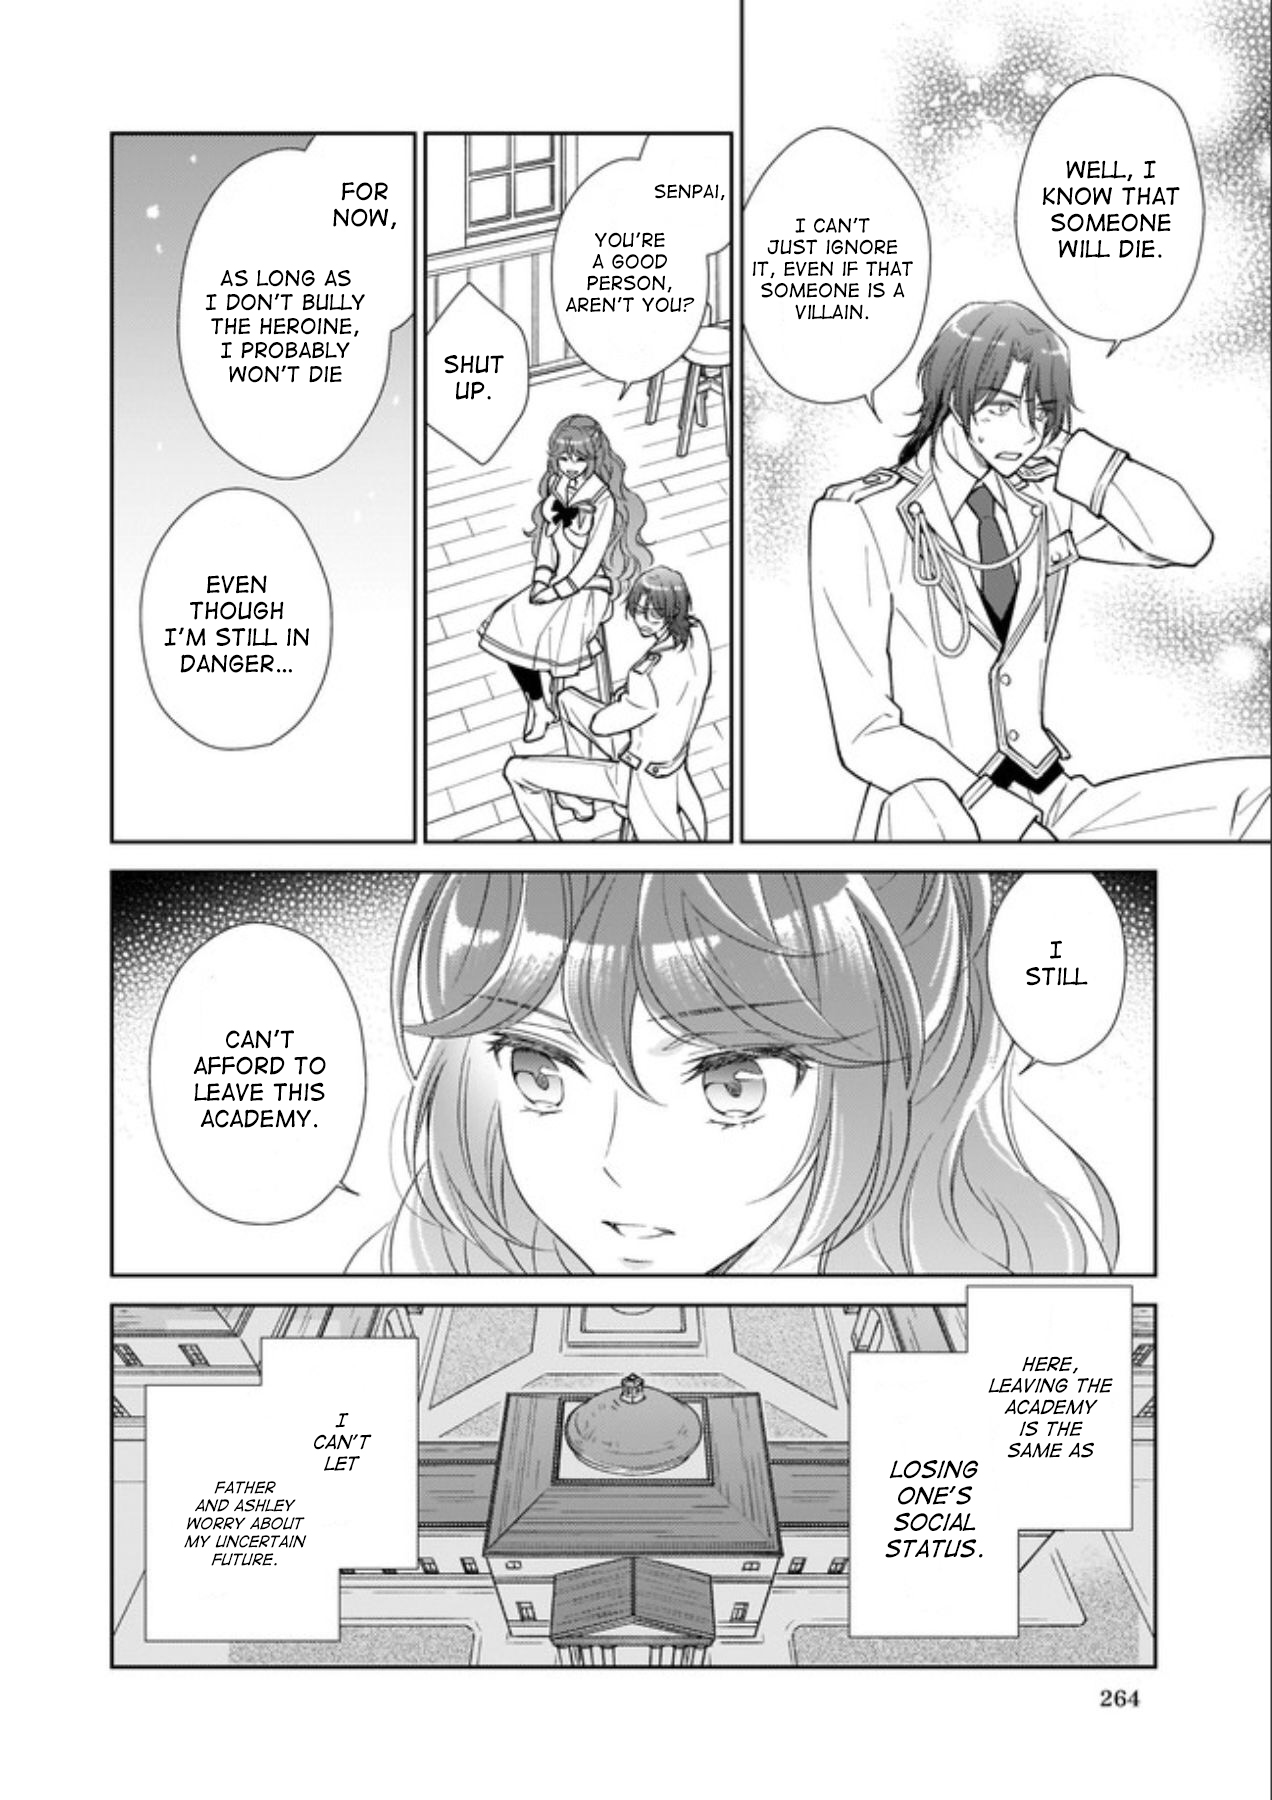 The Result of Being Reincarnated is Having a Master Servant Relationship with the Yandere Love Interest Ch. 3.2